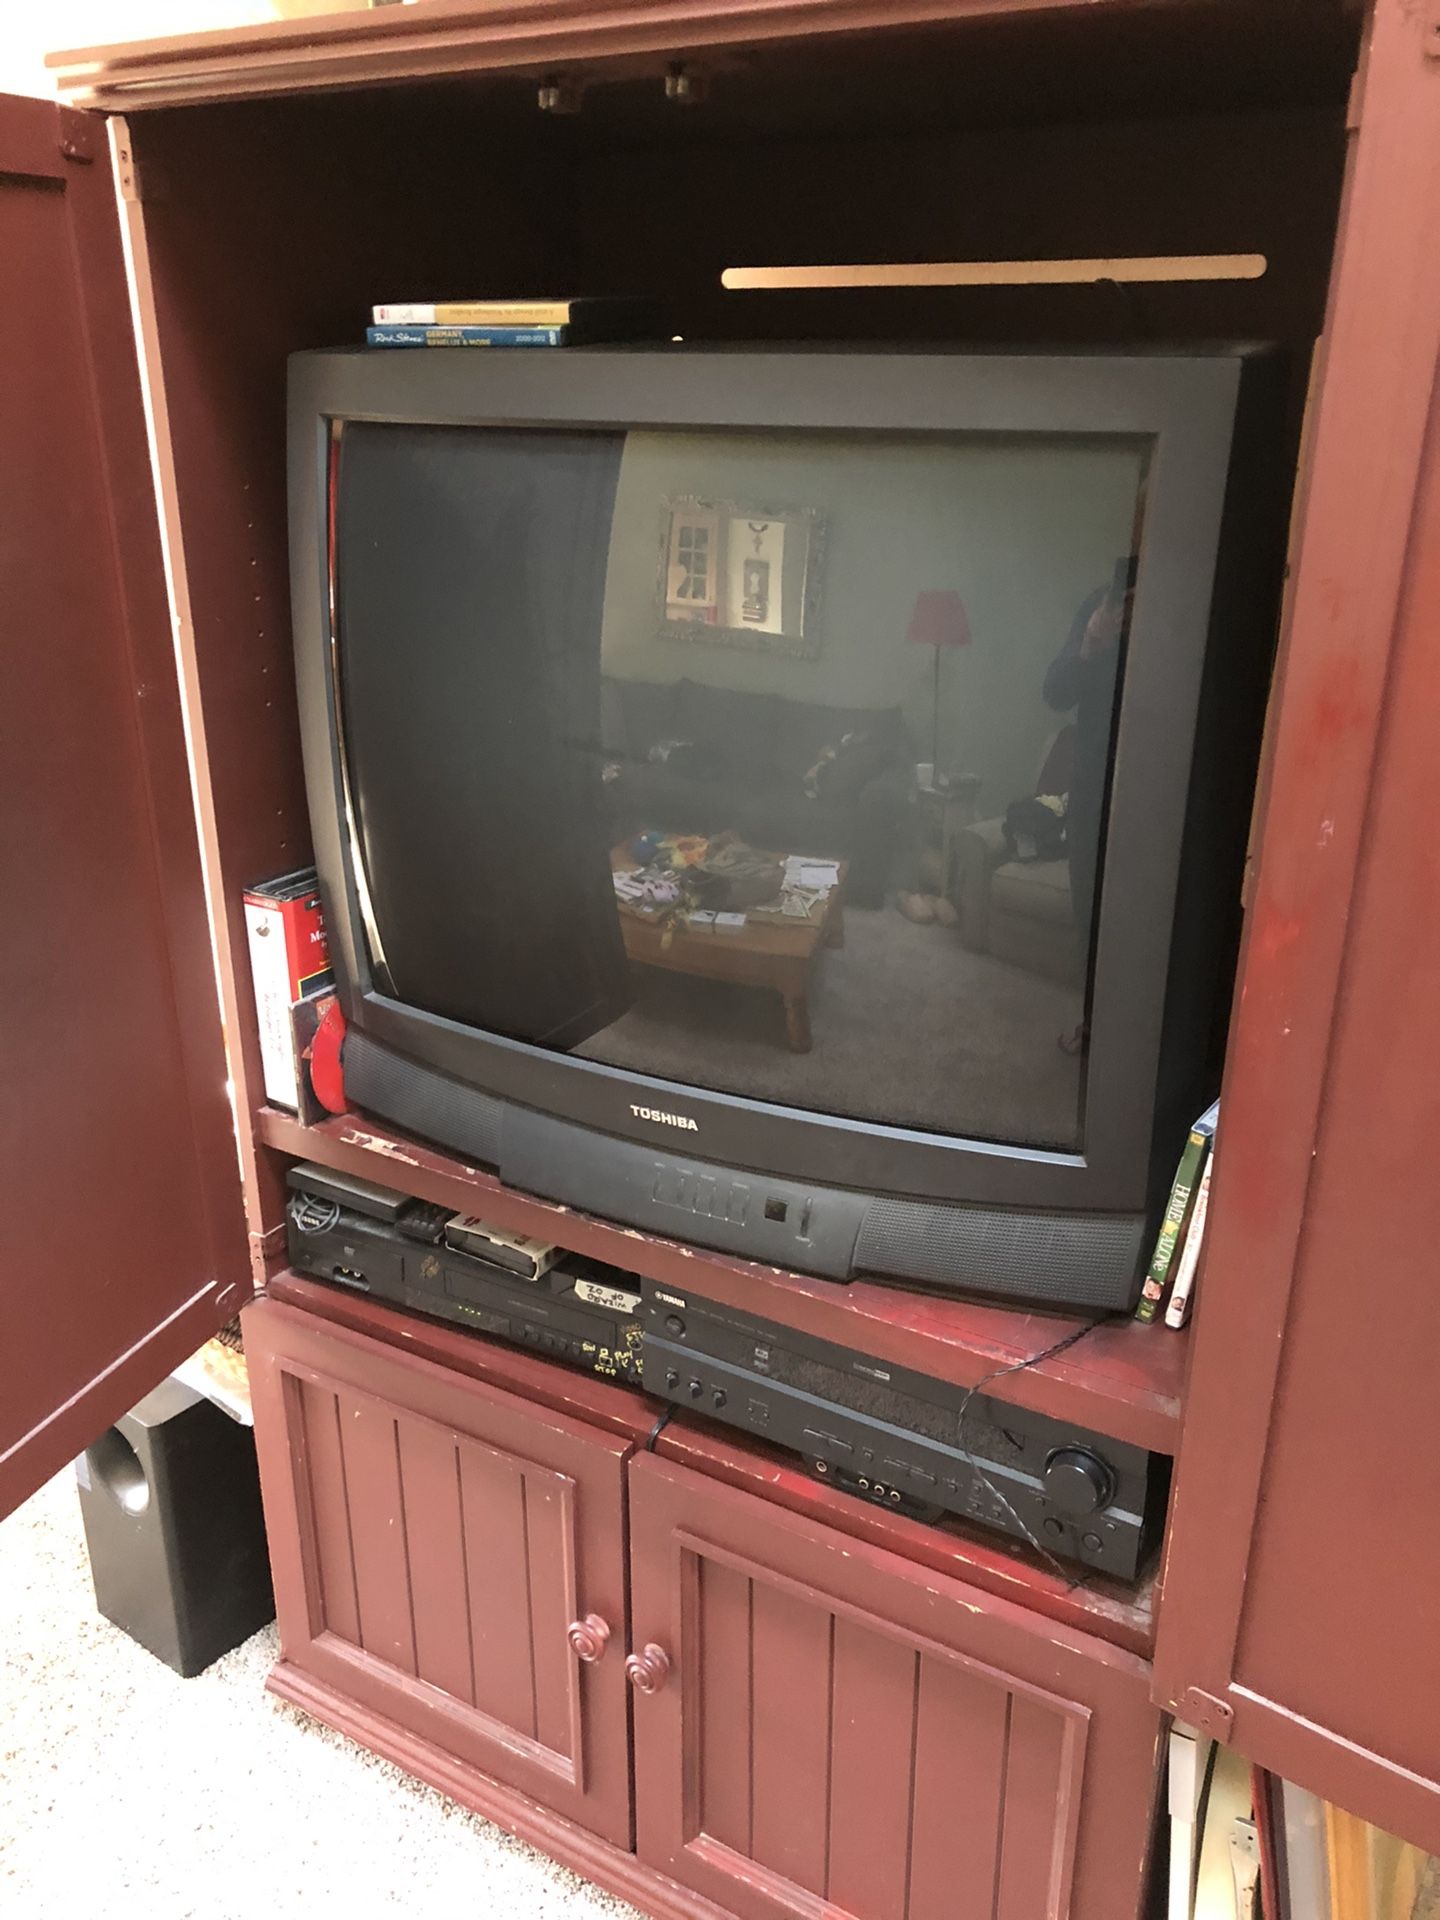 I’ll Pay You $10 To Take This 32 Inch Old School Toshiba Color TV